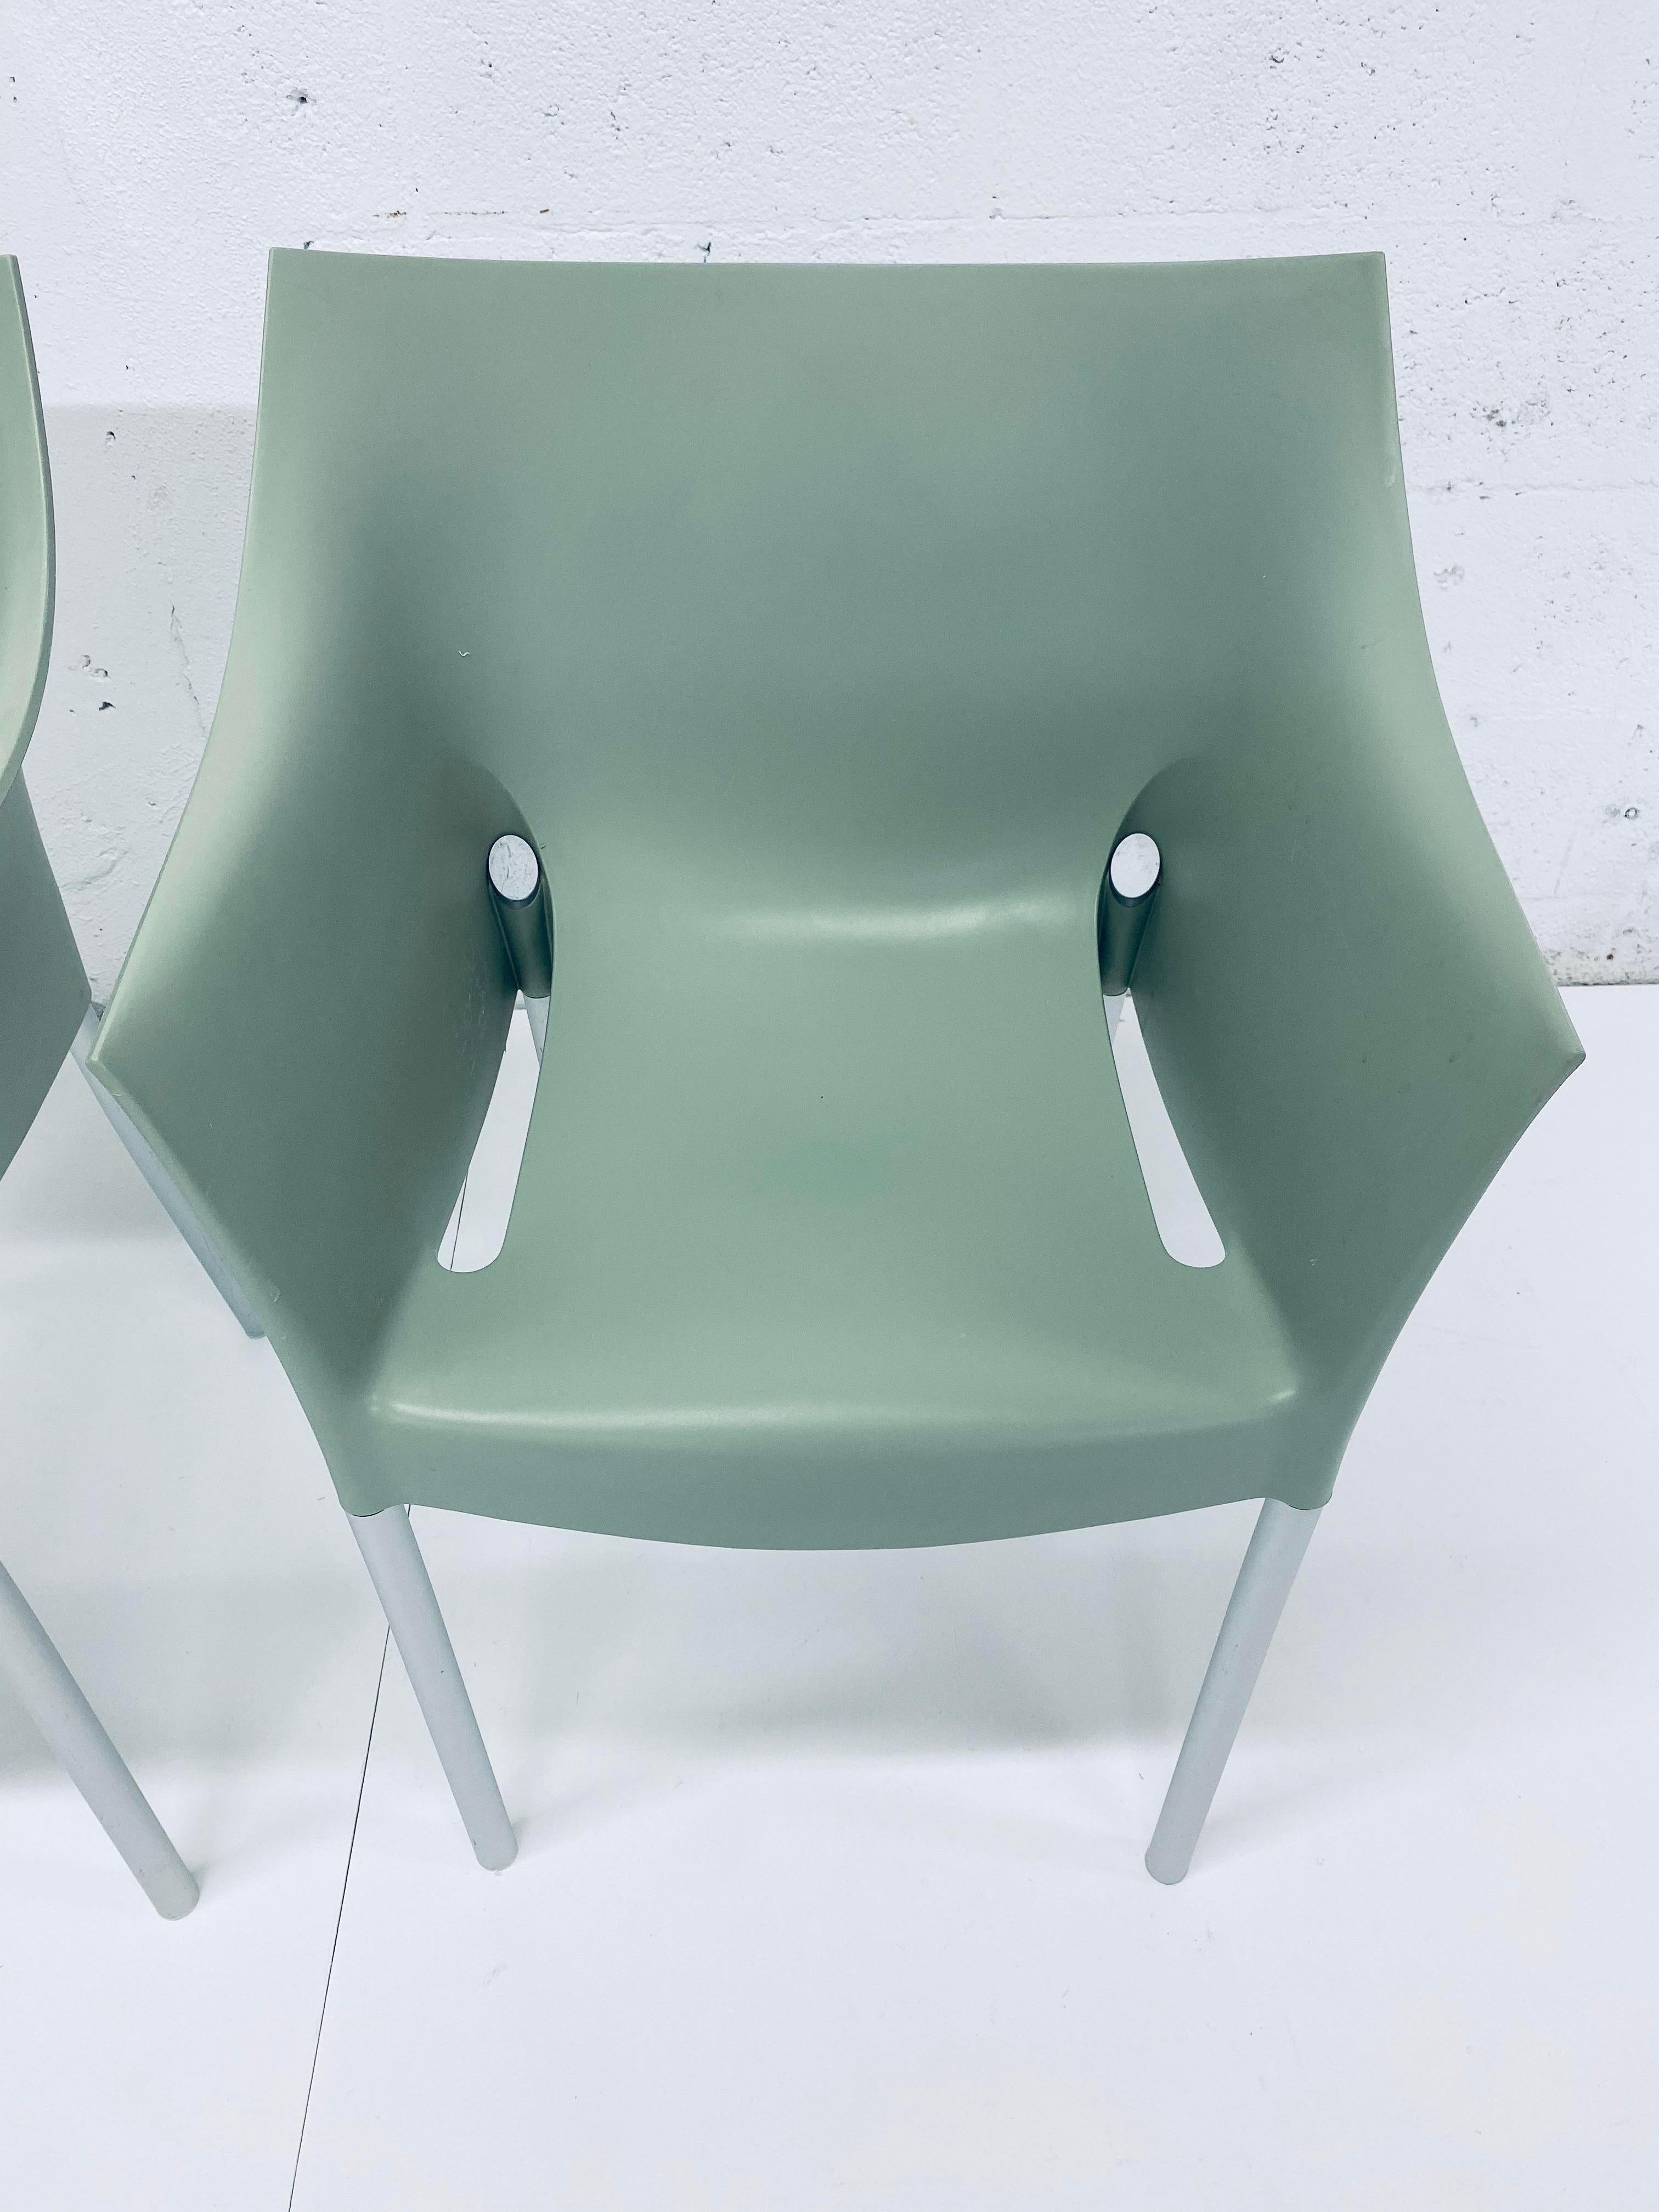 Italian Pair of Philipp Starck “Dr. No” Chairs for Kartell